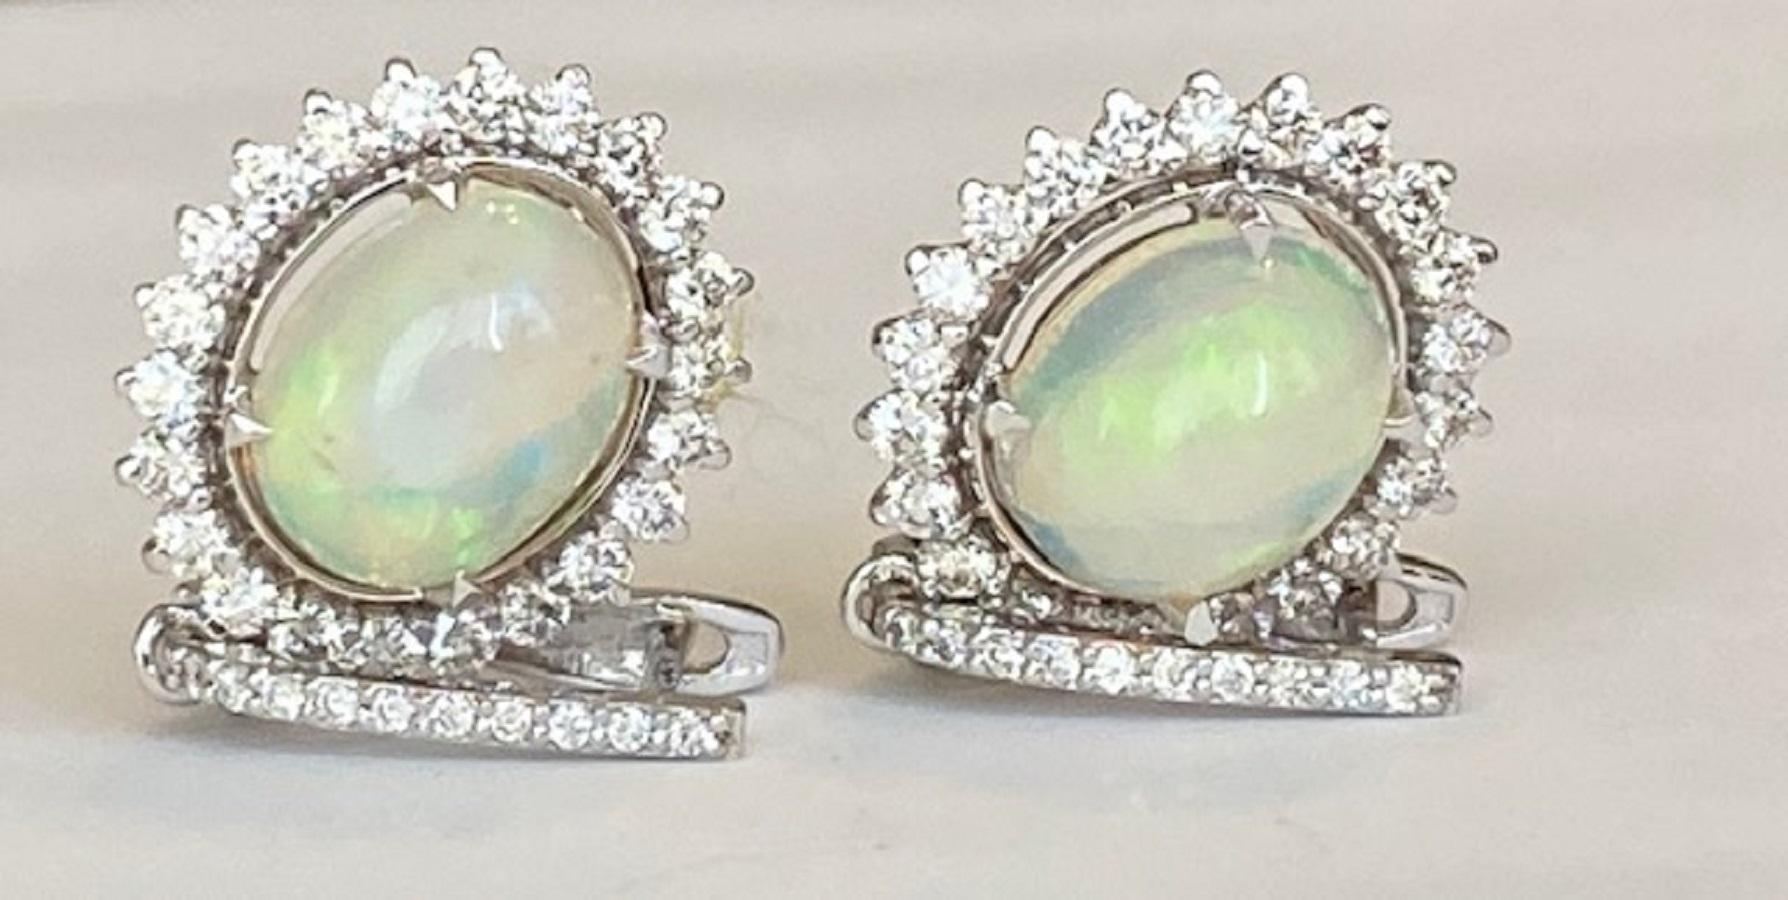 Women's 18 Kt. White Gold Earrings with 4.15 Ct Opals and Diamonds